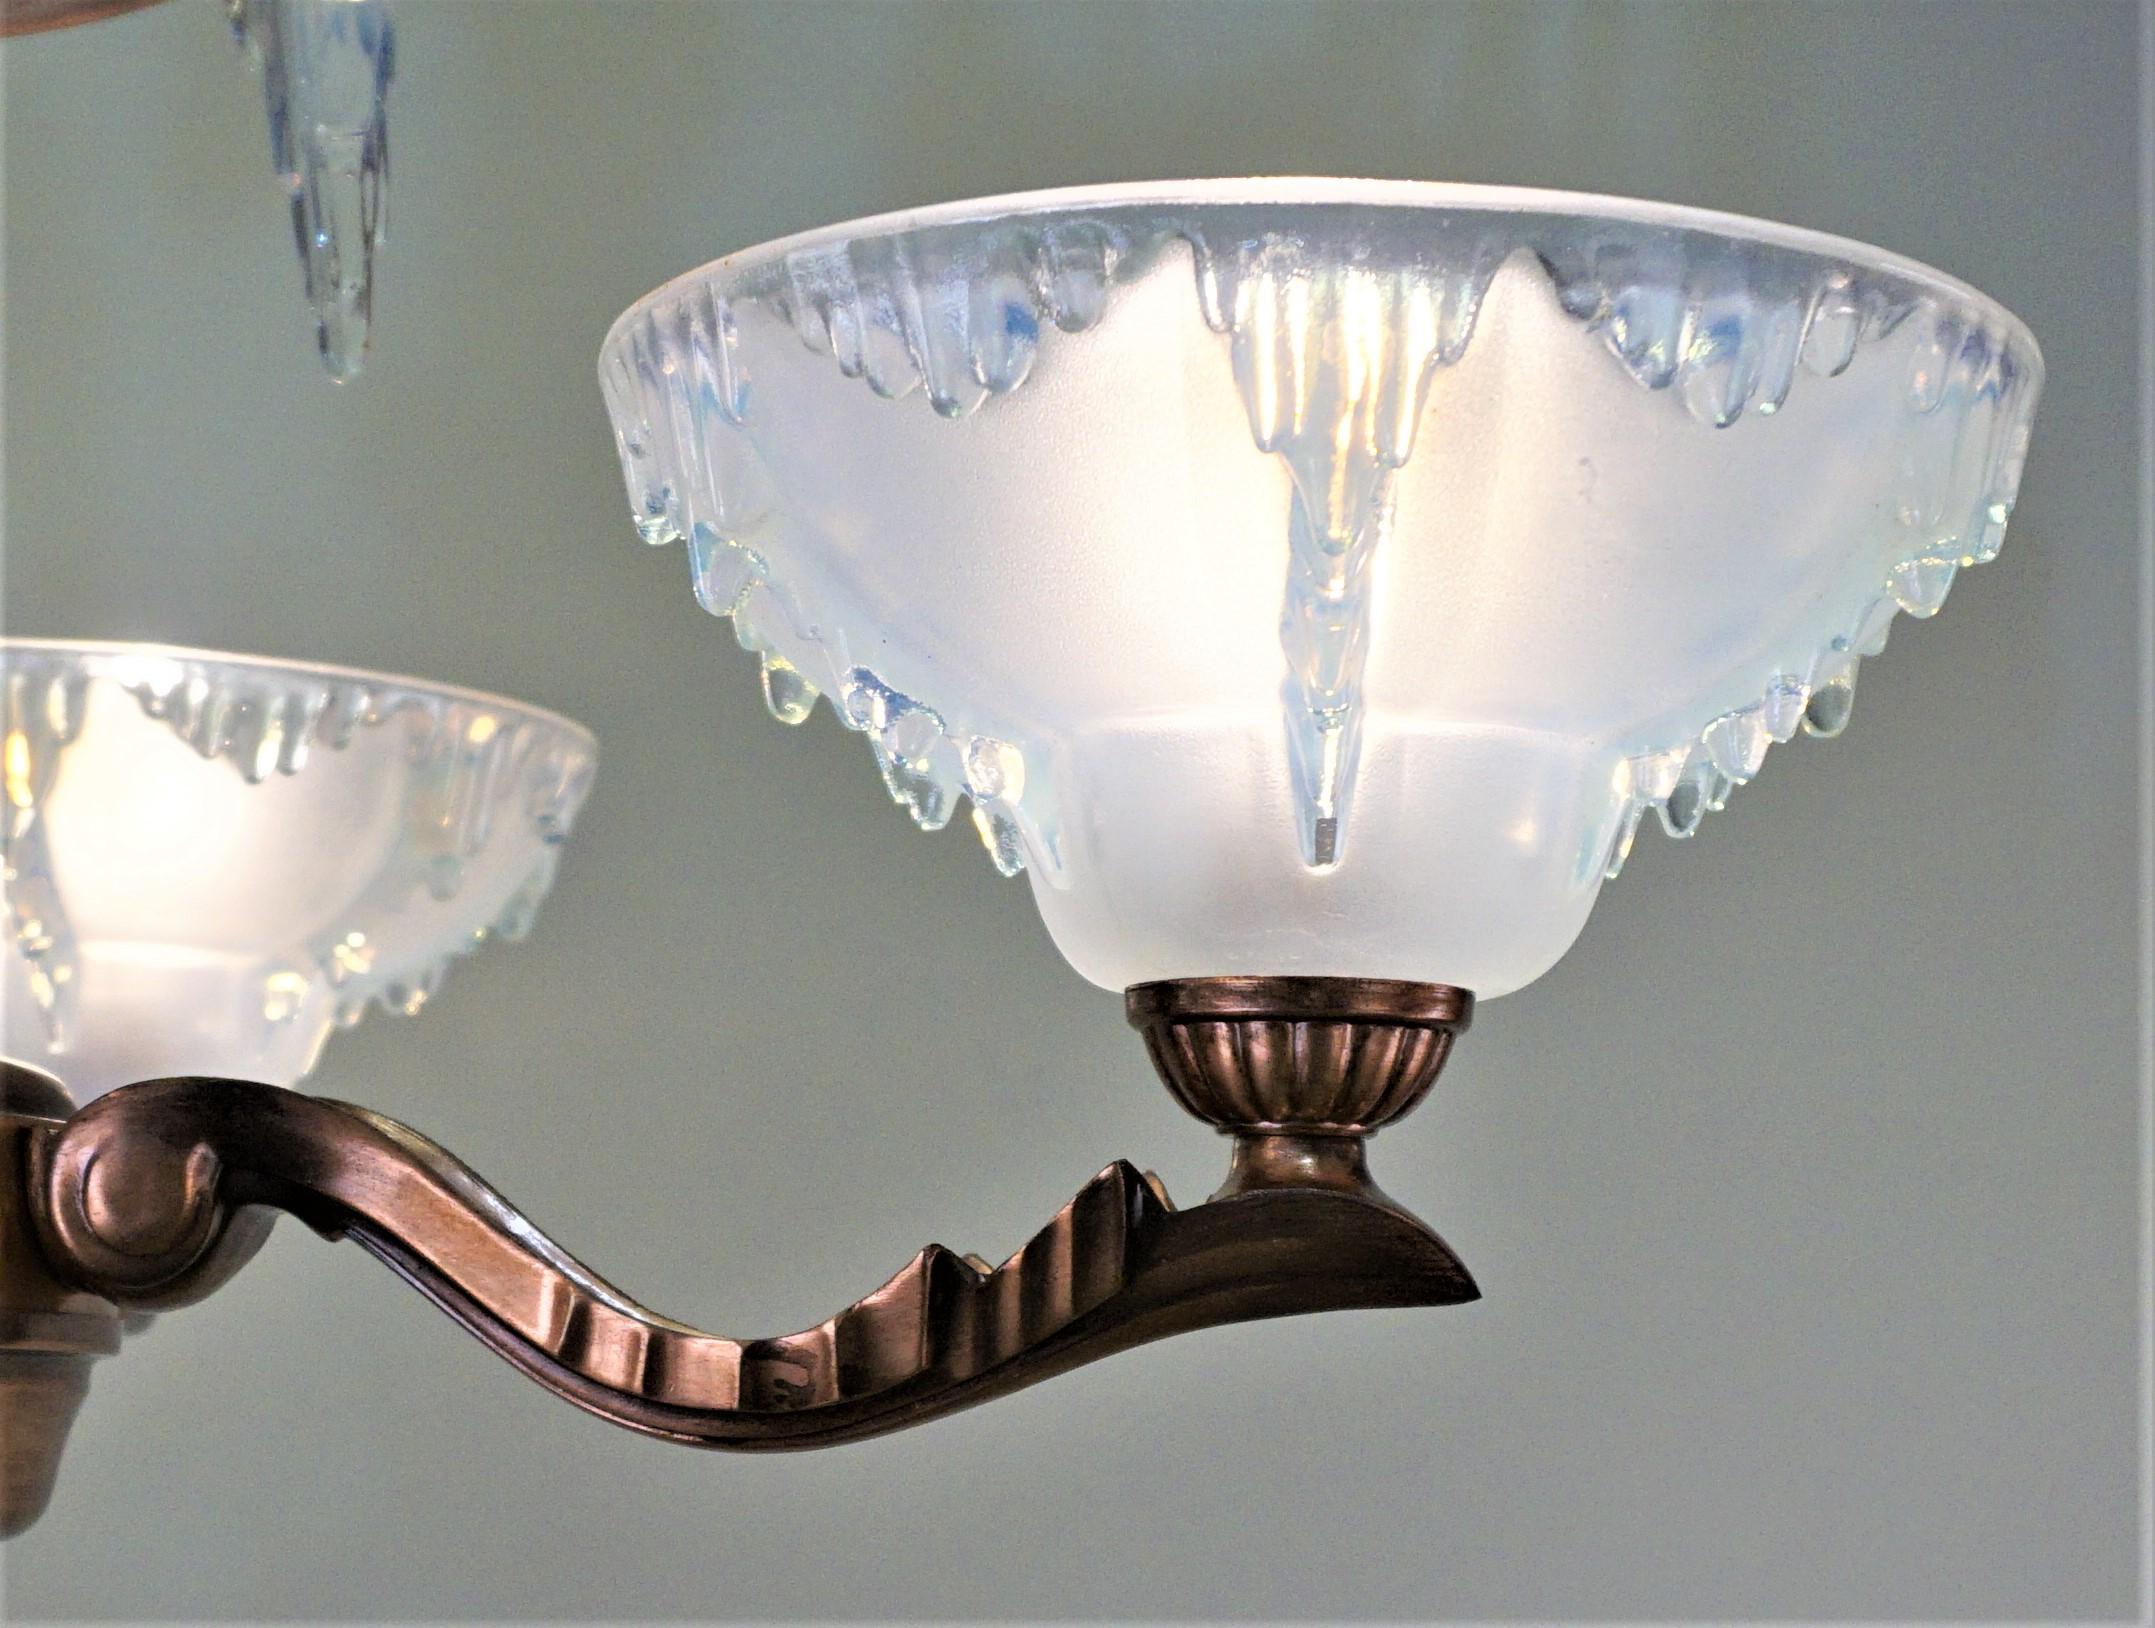 French four arm plus bottom light copper chandelier with opalescent glass chandelier by Ezan